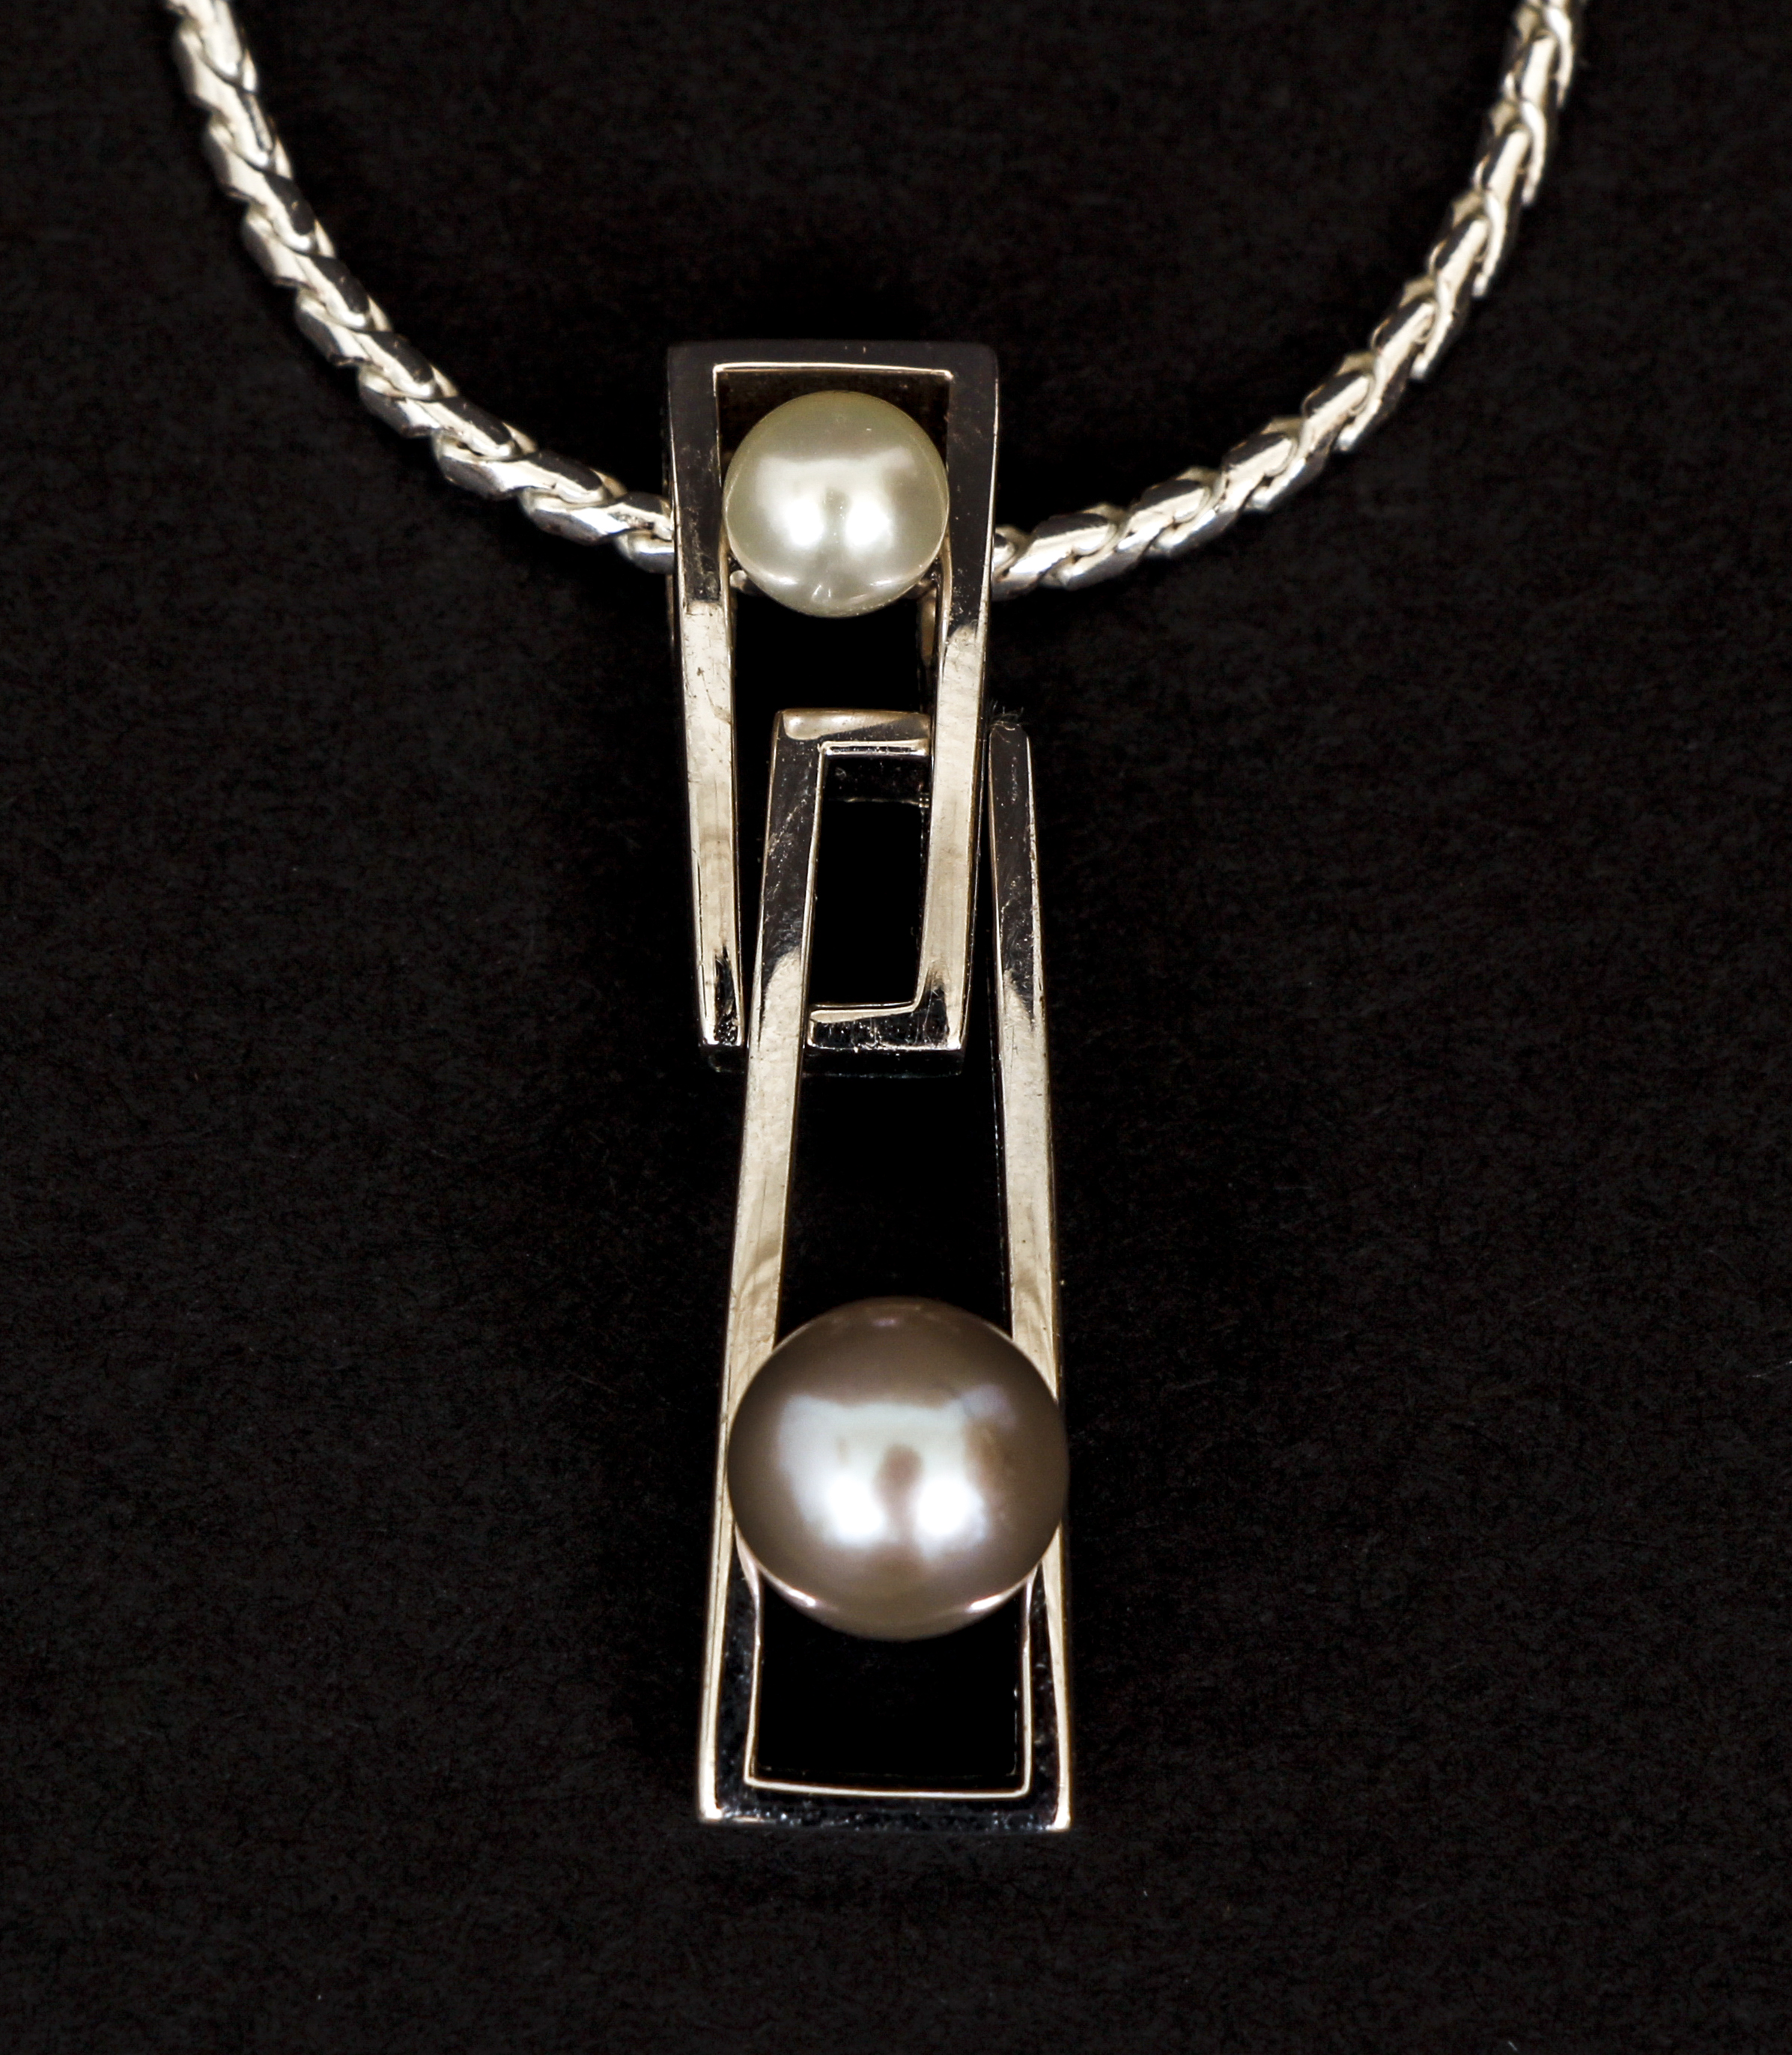 Silver and Cultured Pearl Pendant Necklace - Image 2 of 4